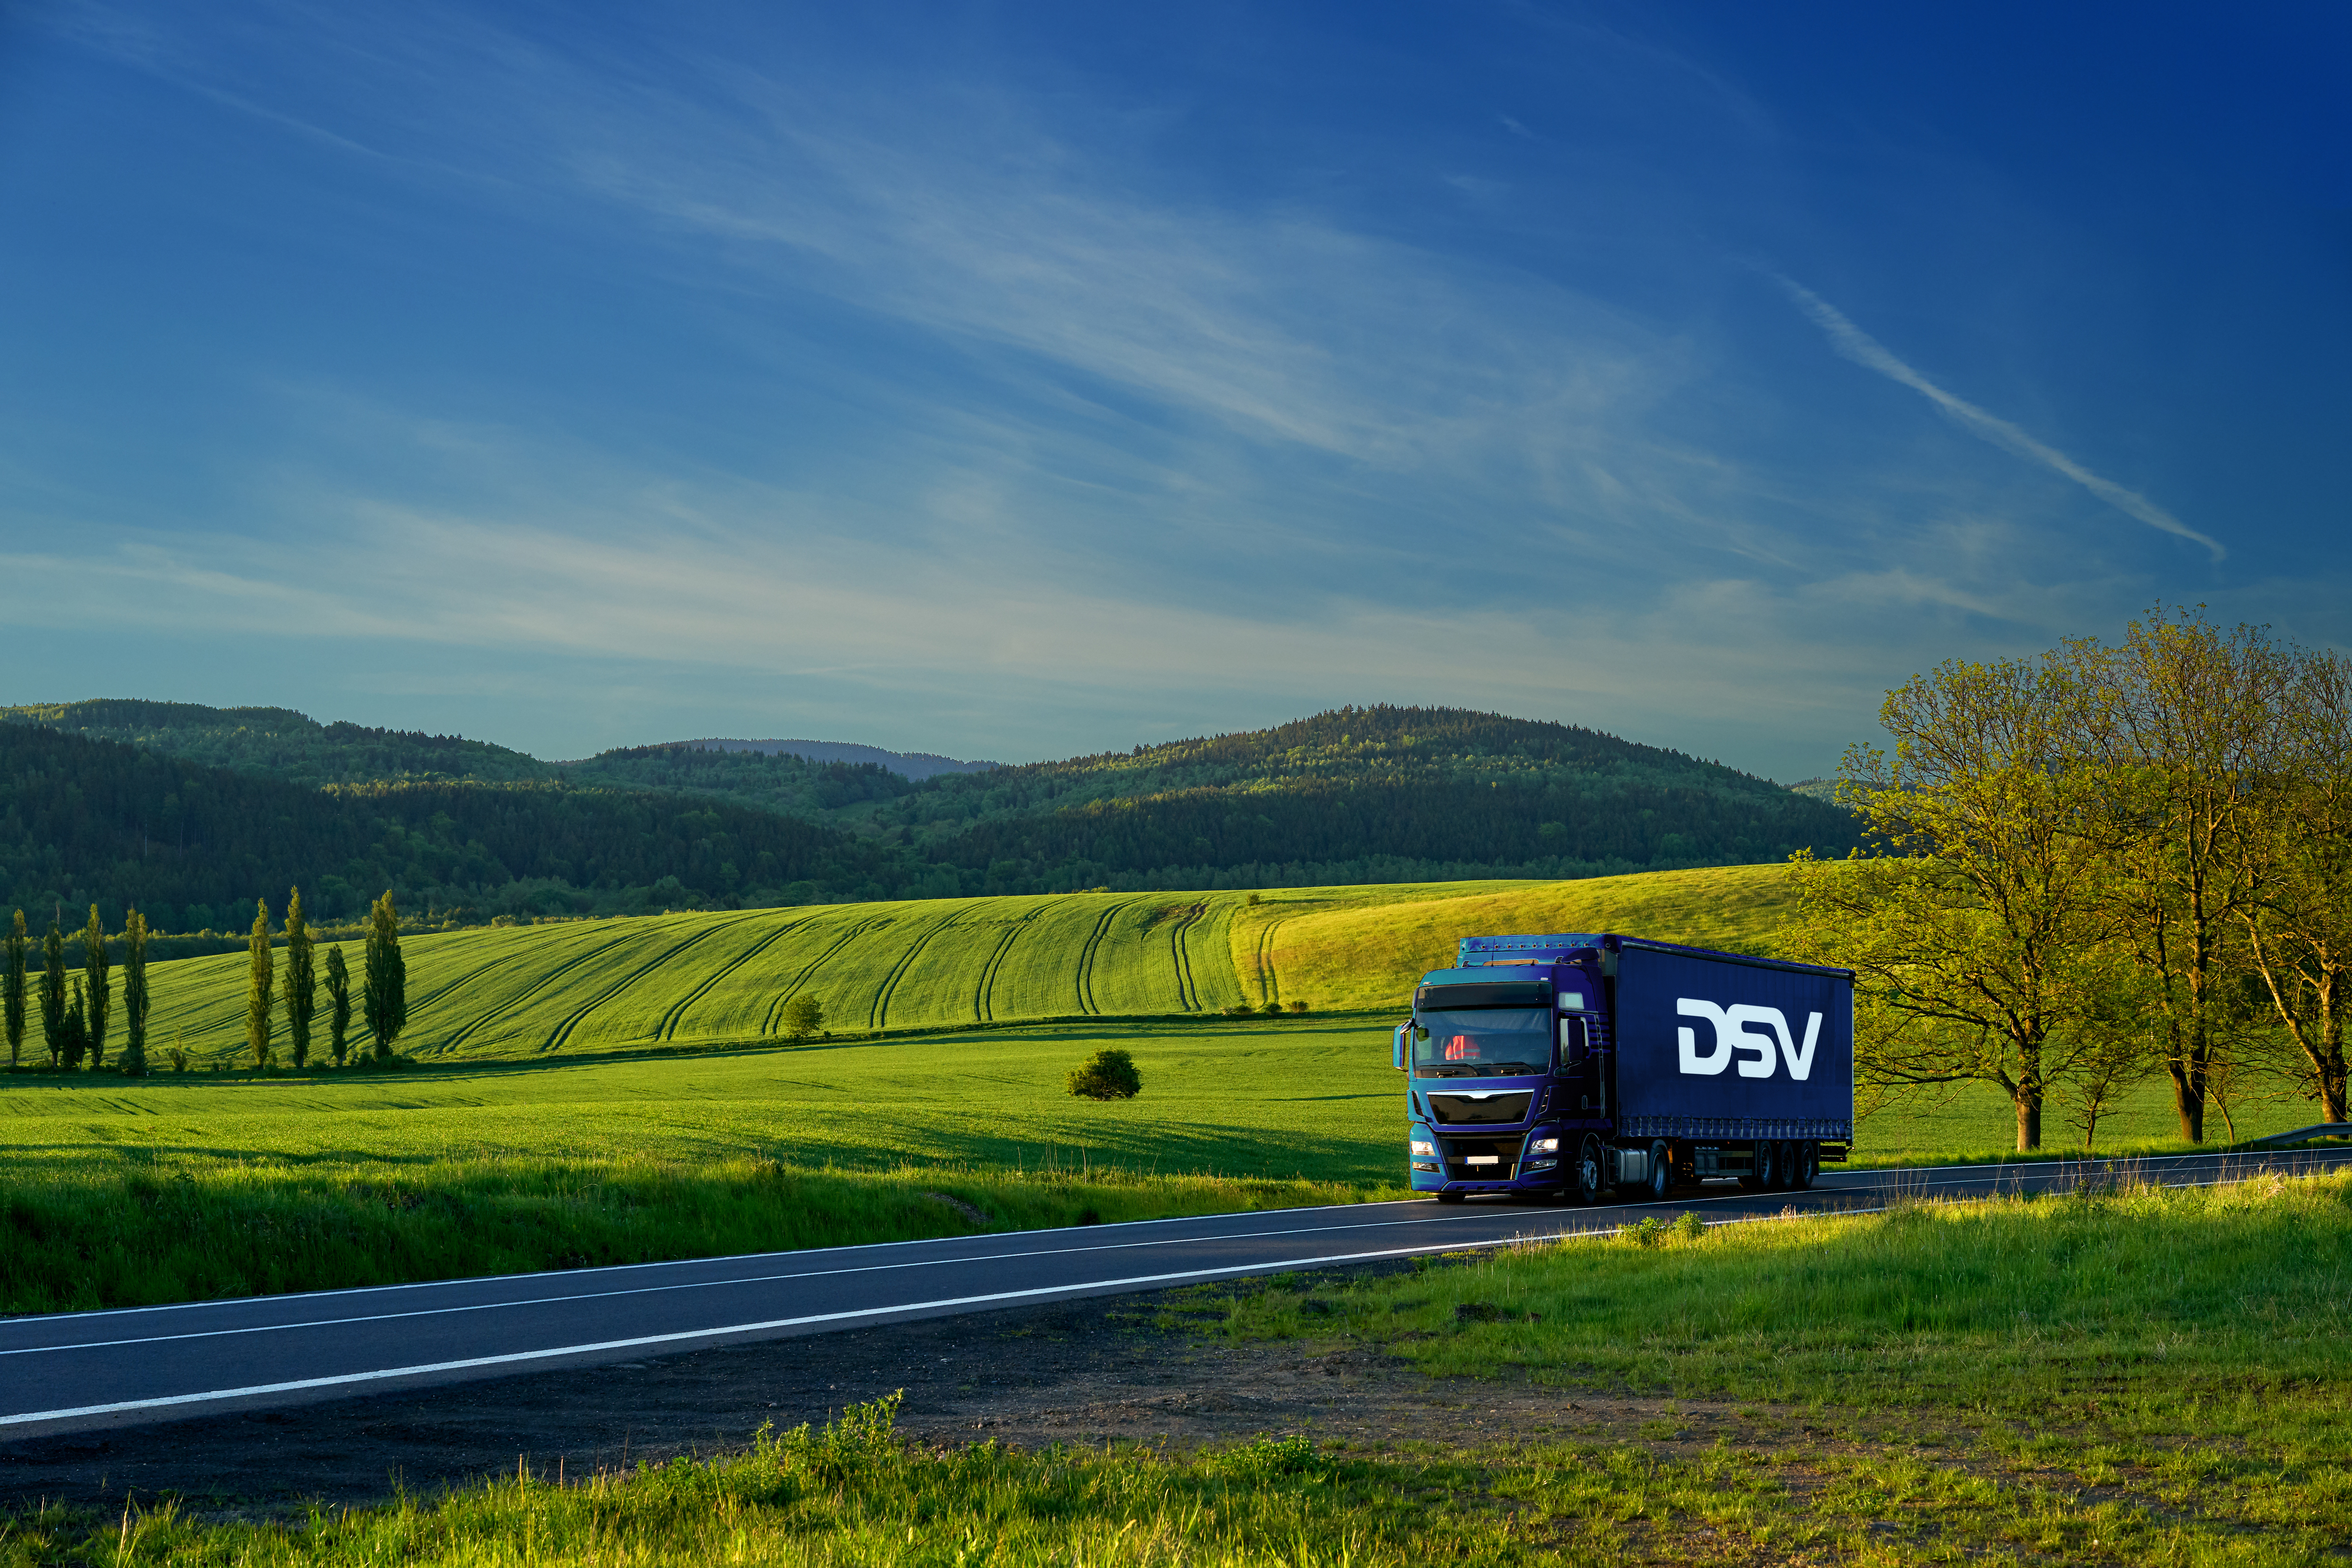 DSV Road Analysis: The freight market slowed growth in Q1 amid low inflation and consumption